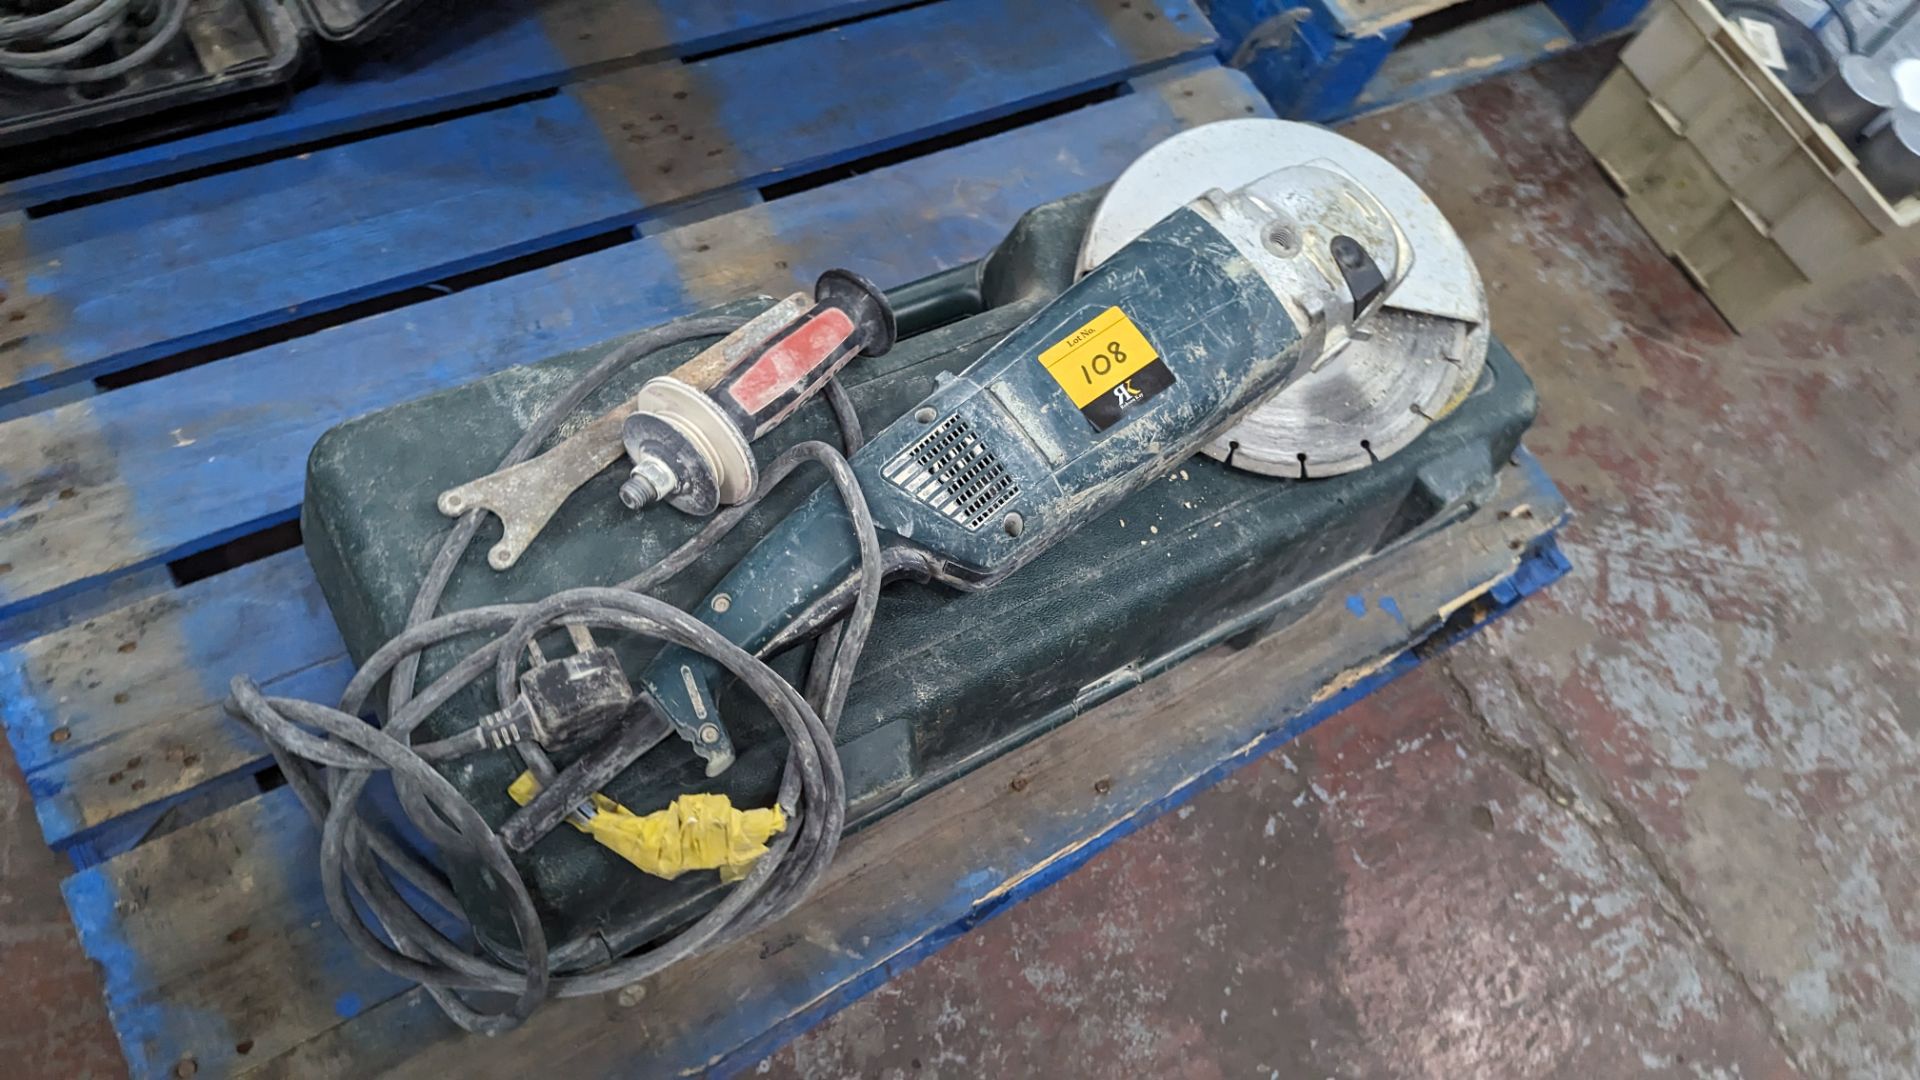 Metabo large heavy duty angle grinder in case - Image 2 of 5